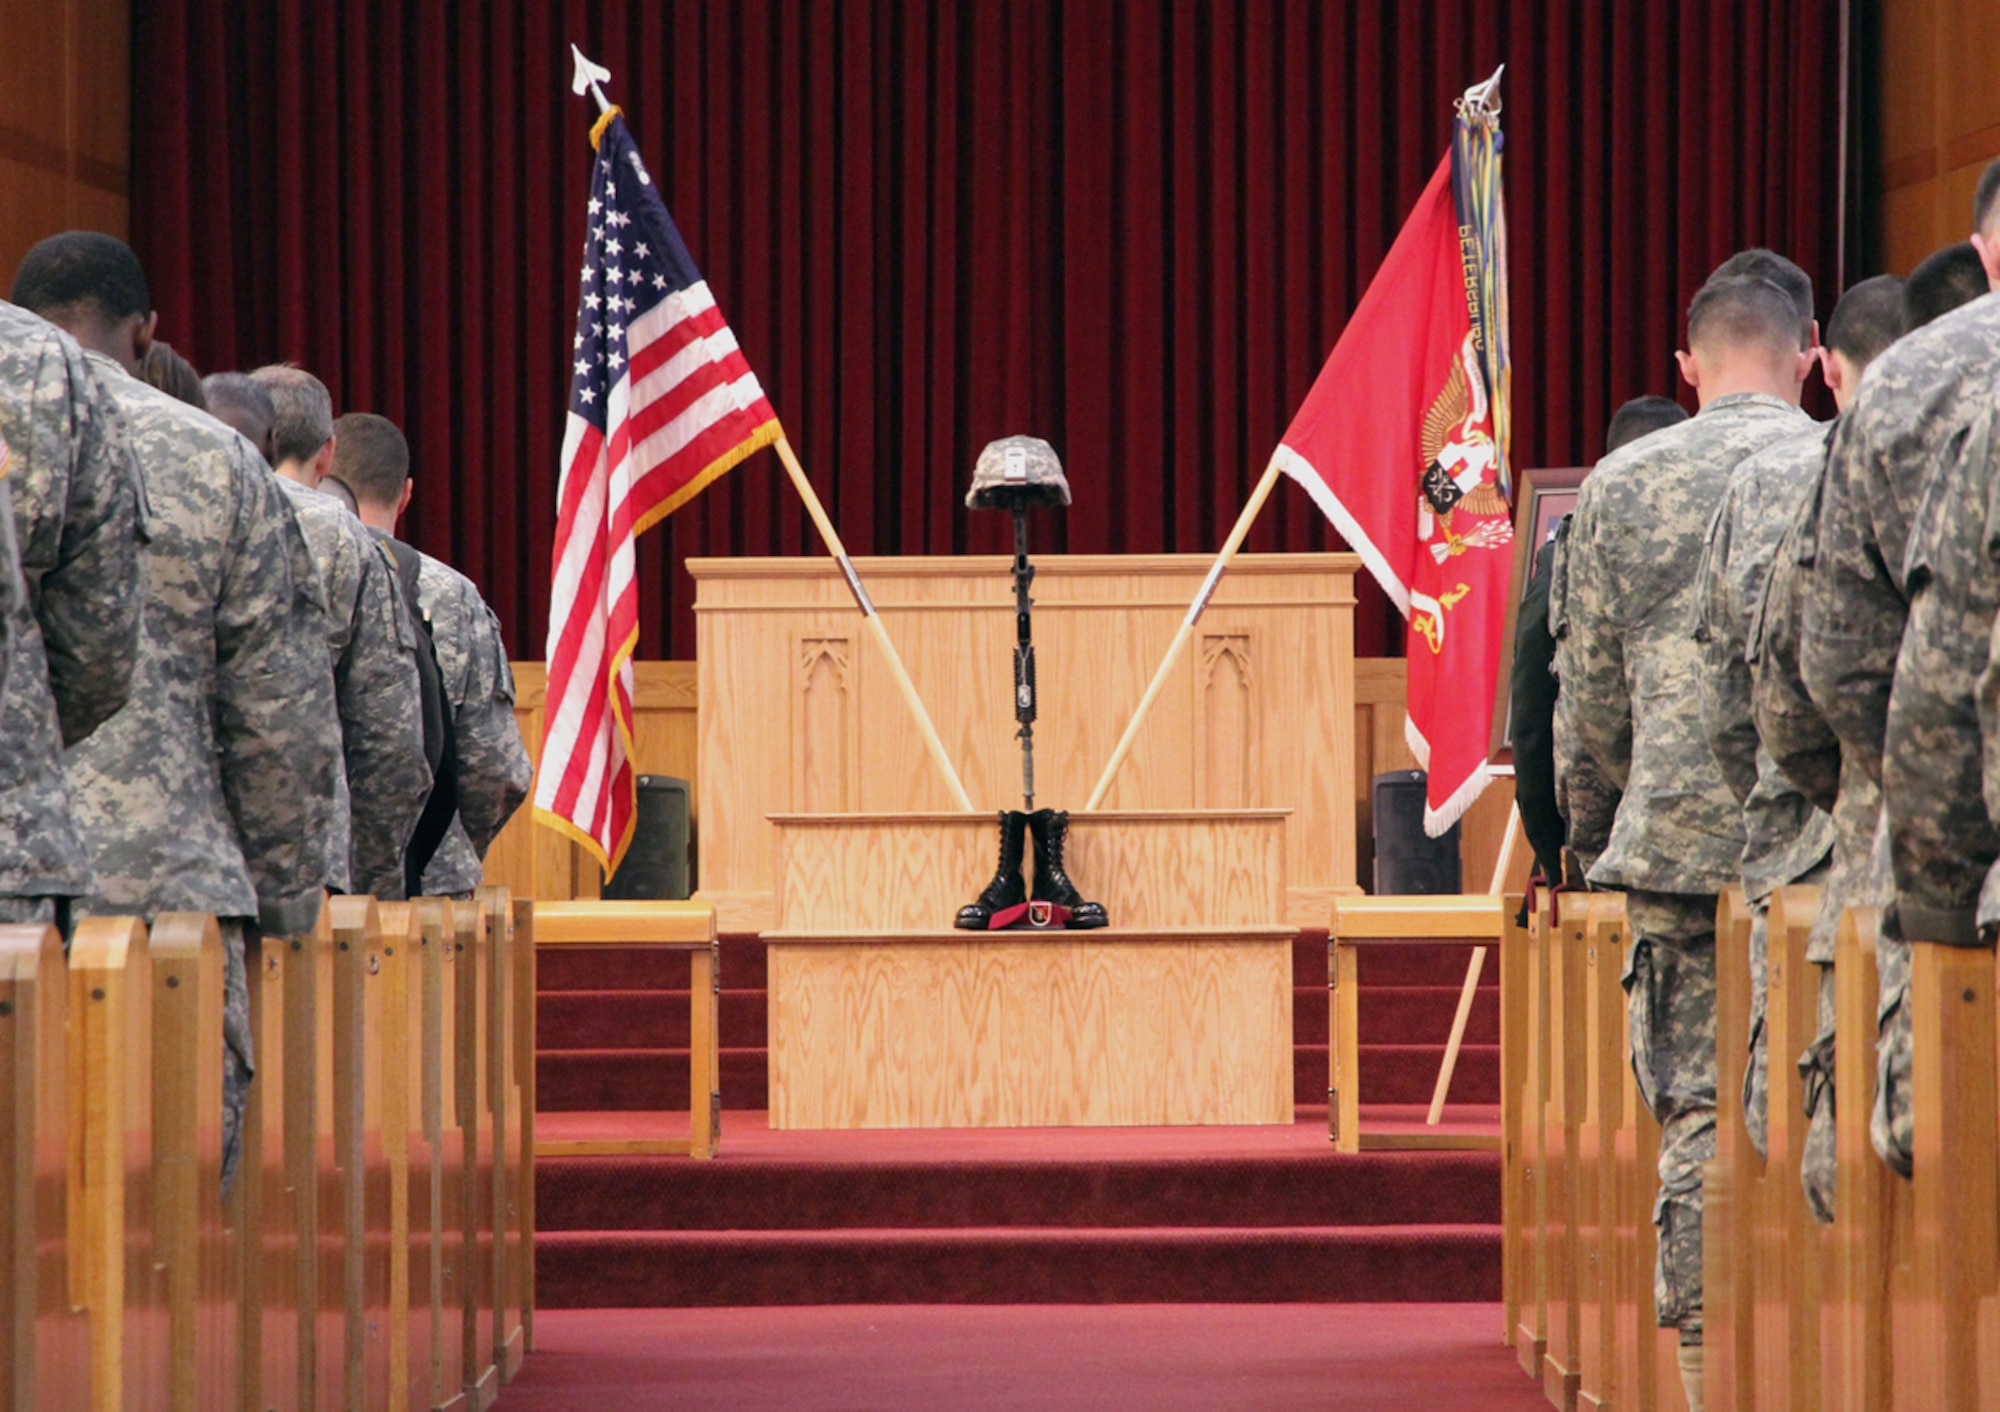 Soldiers honor the memory of Spc. Arturo Martinez at a memorial ceremony May 24 at the Joint Base Elmendorf-Richardson Soldiers' Chapel. (U.S. Army photo/Sgt. Tamika Dillard)

